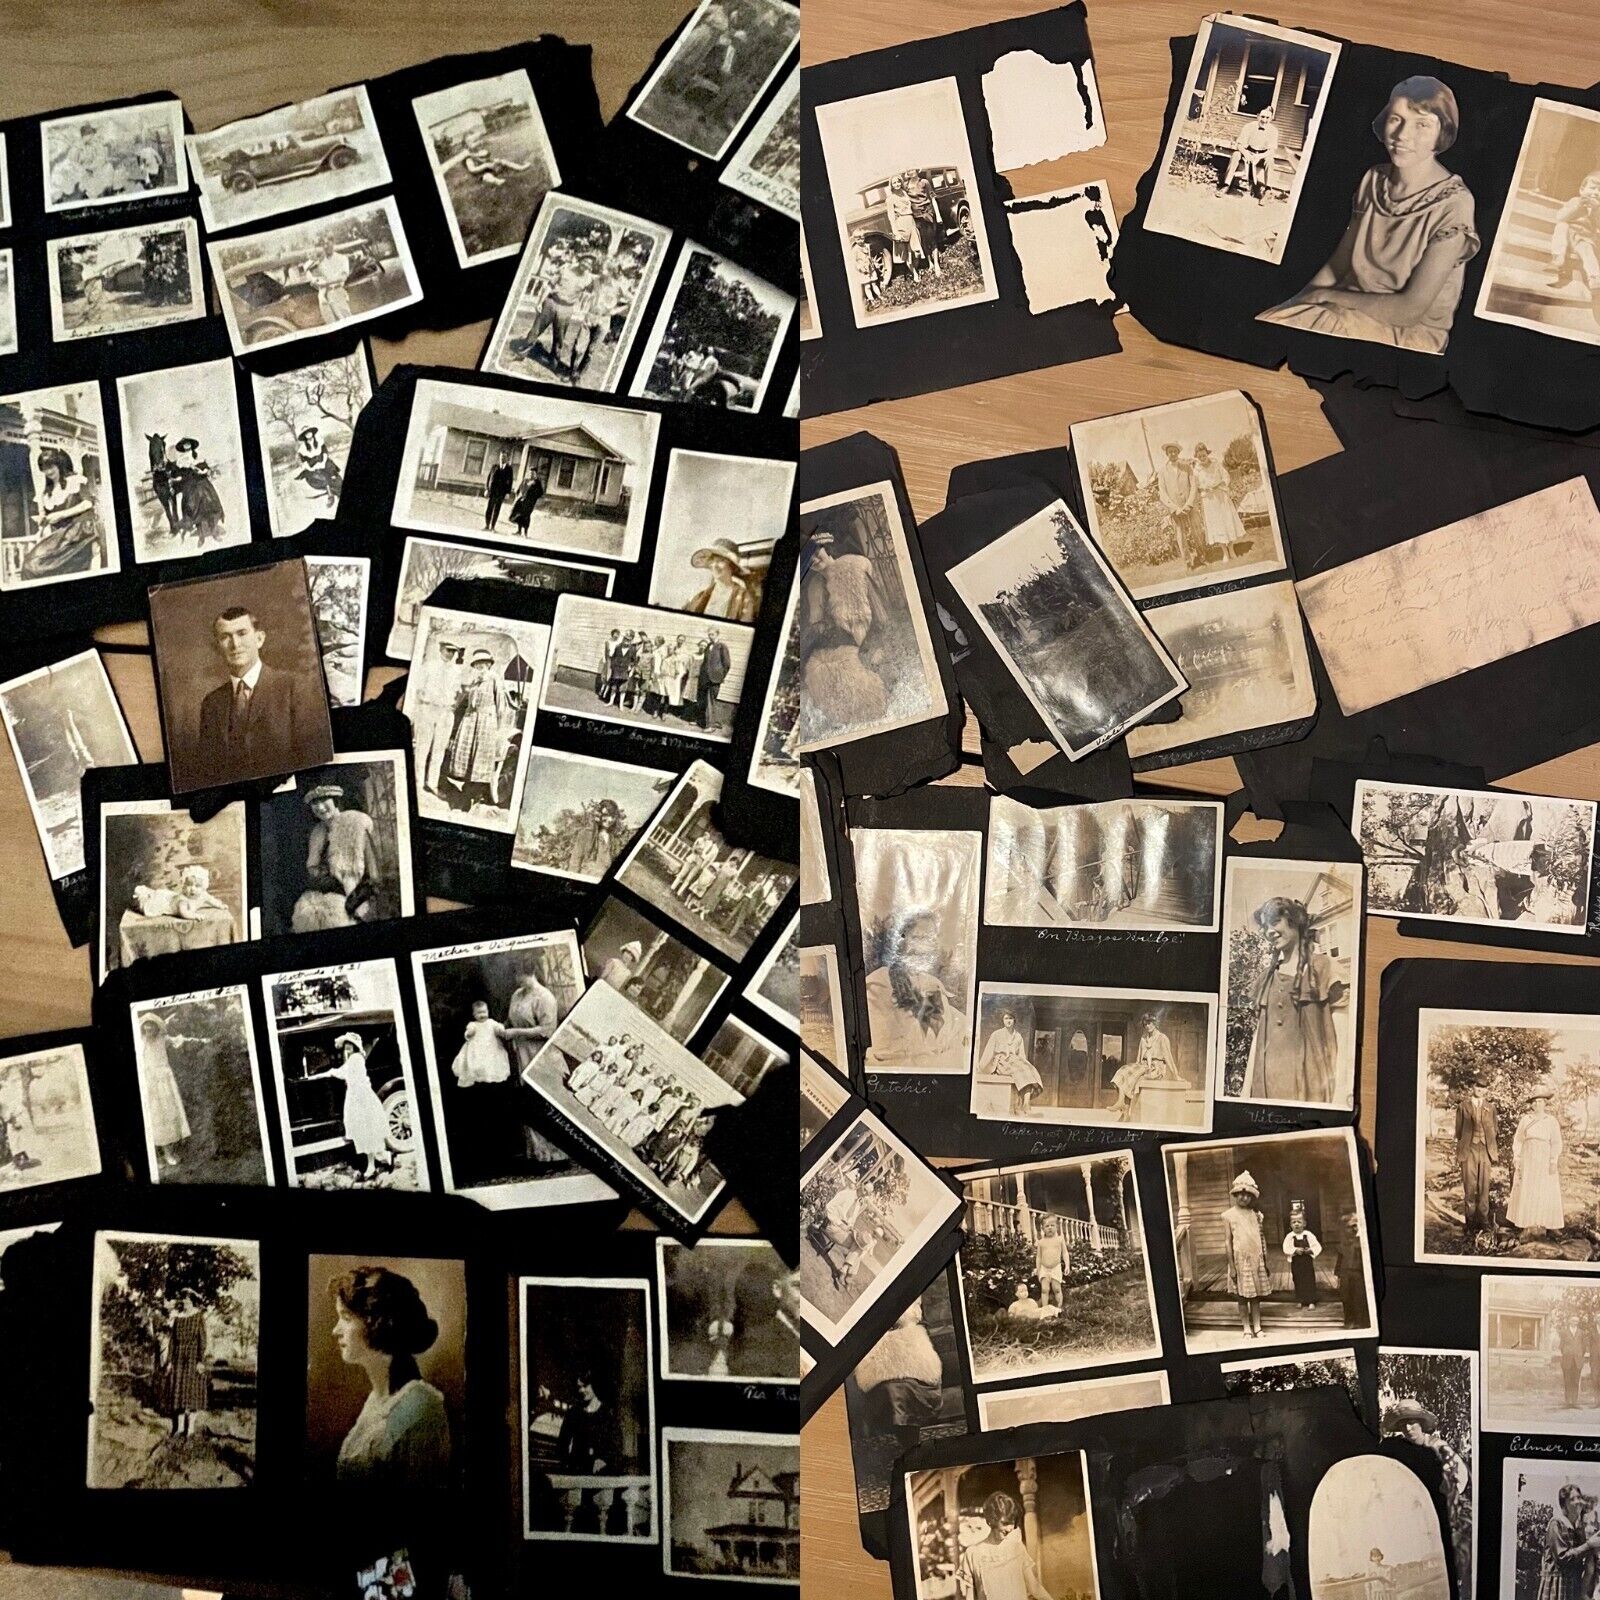 Vintage Photos Large Lot of  72  on Album Pages B&W, Sepia 1900-1920s People